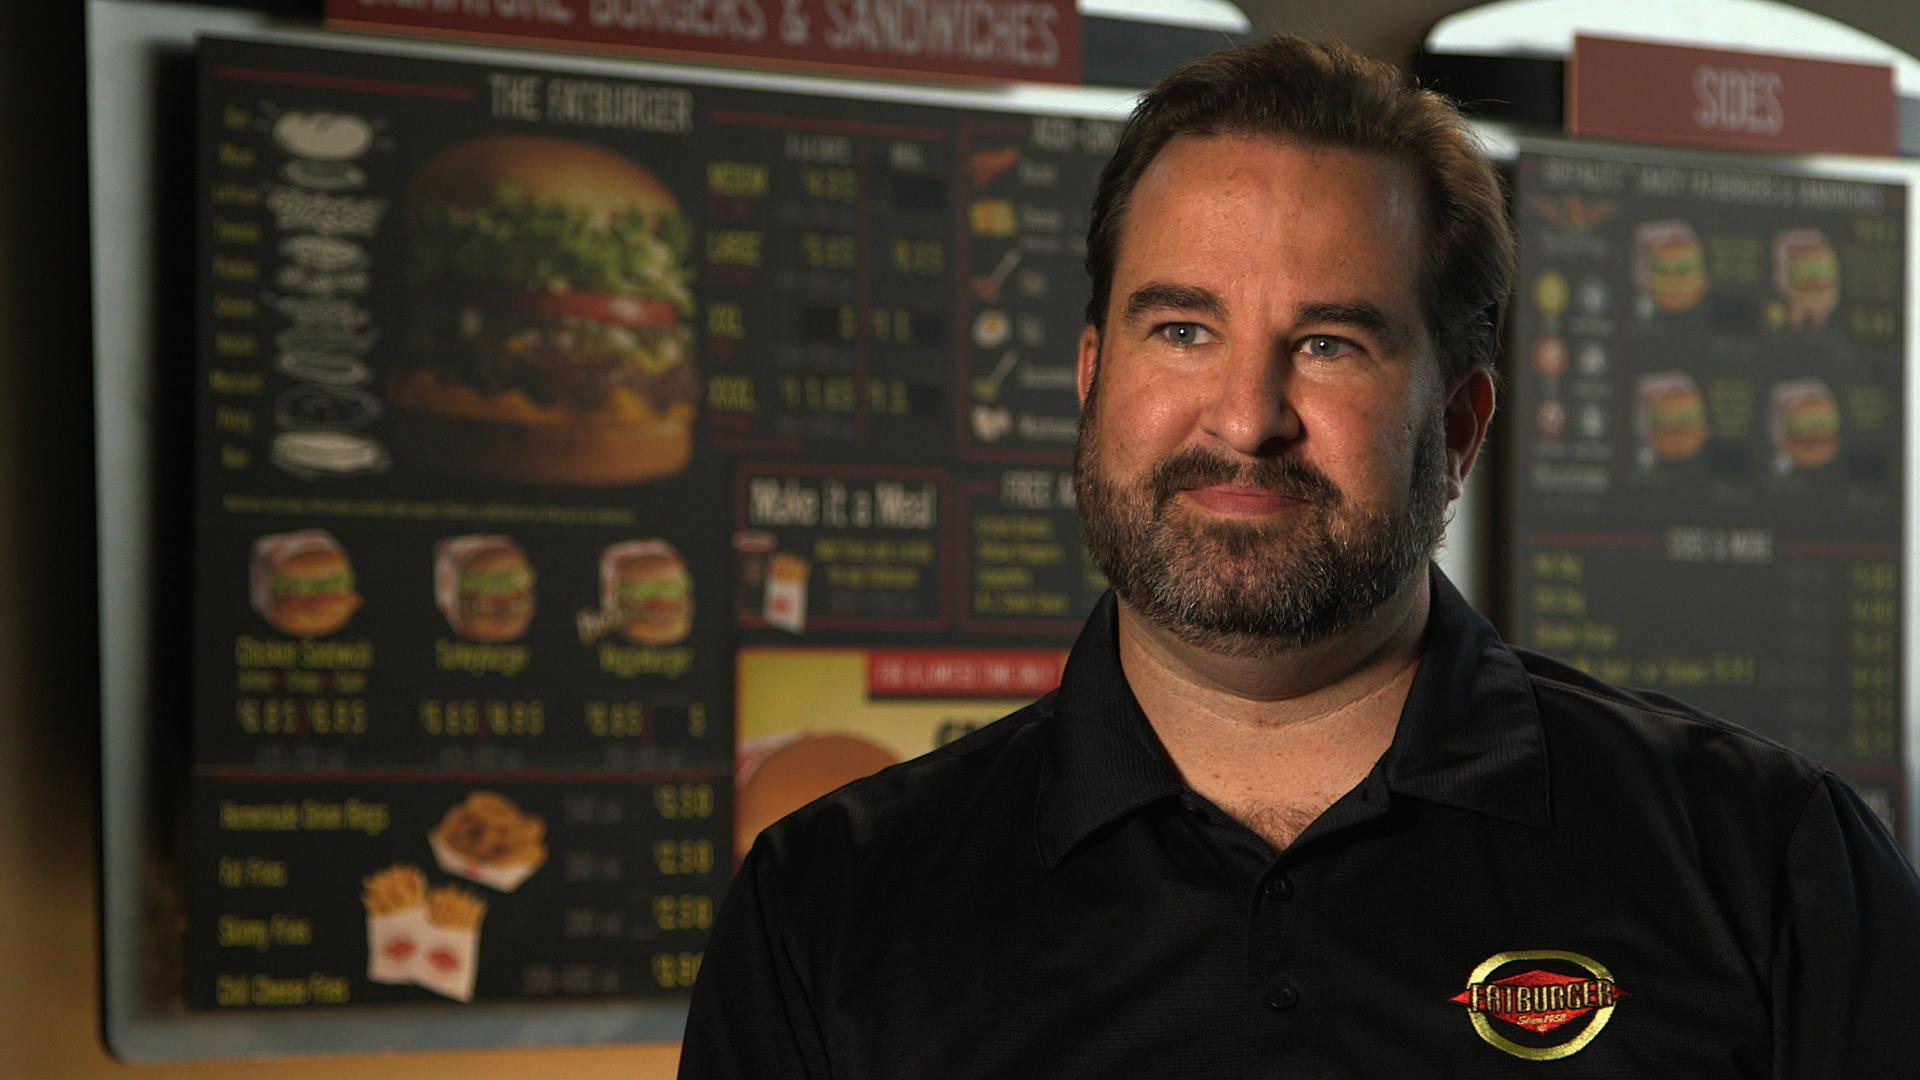 James Newell, vice president of Operations at Los Angeles-based Fatburger, oversees operations for Fatburger’s more than 150 corporate and franchise-owned stores.